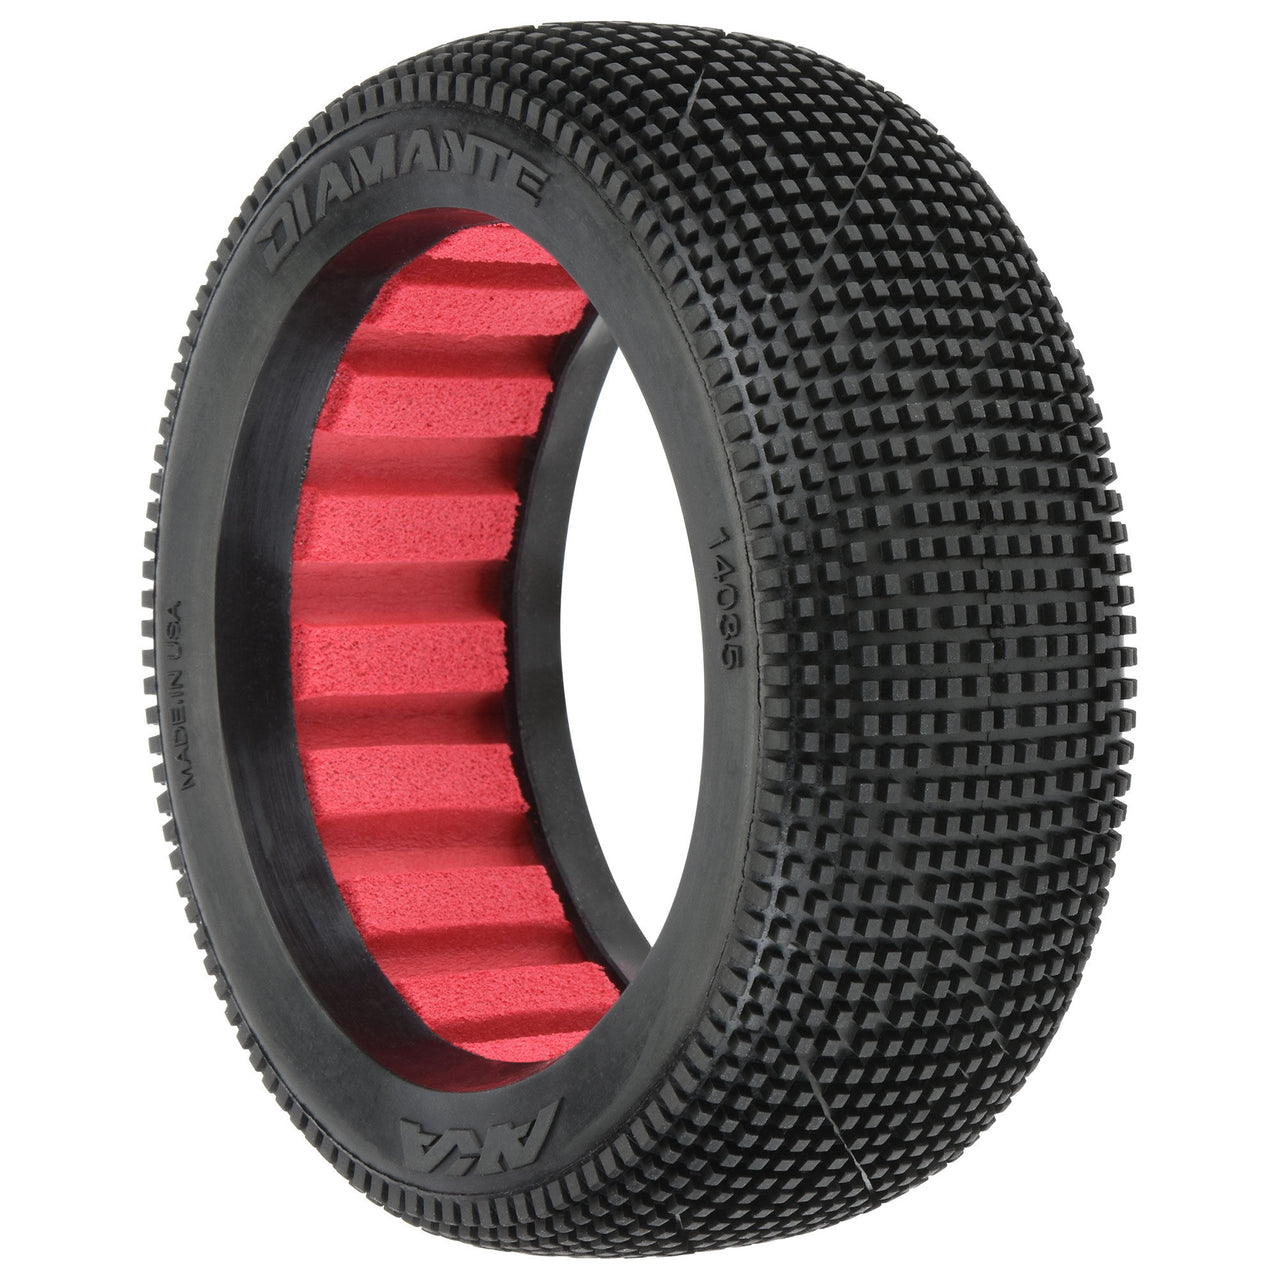 AKA14035SR 1/8 Diamante Soft Front/Rear Off-Road Buggy Tires (2)